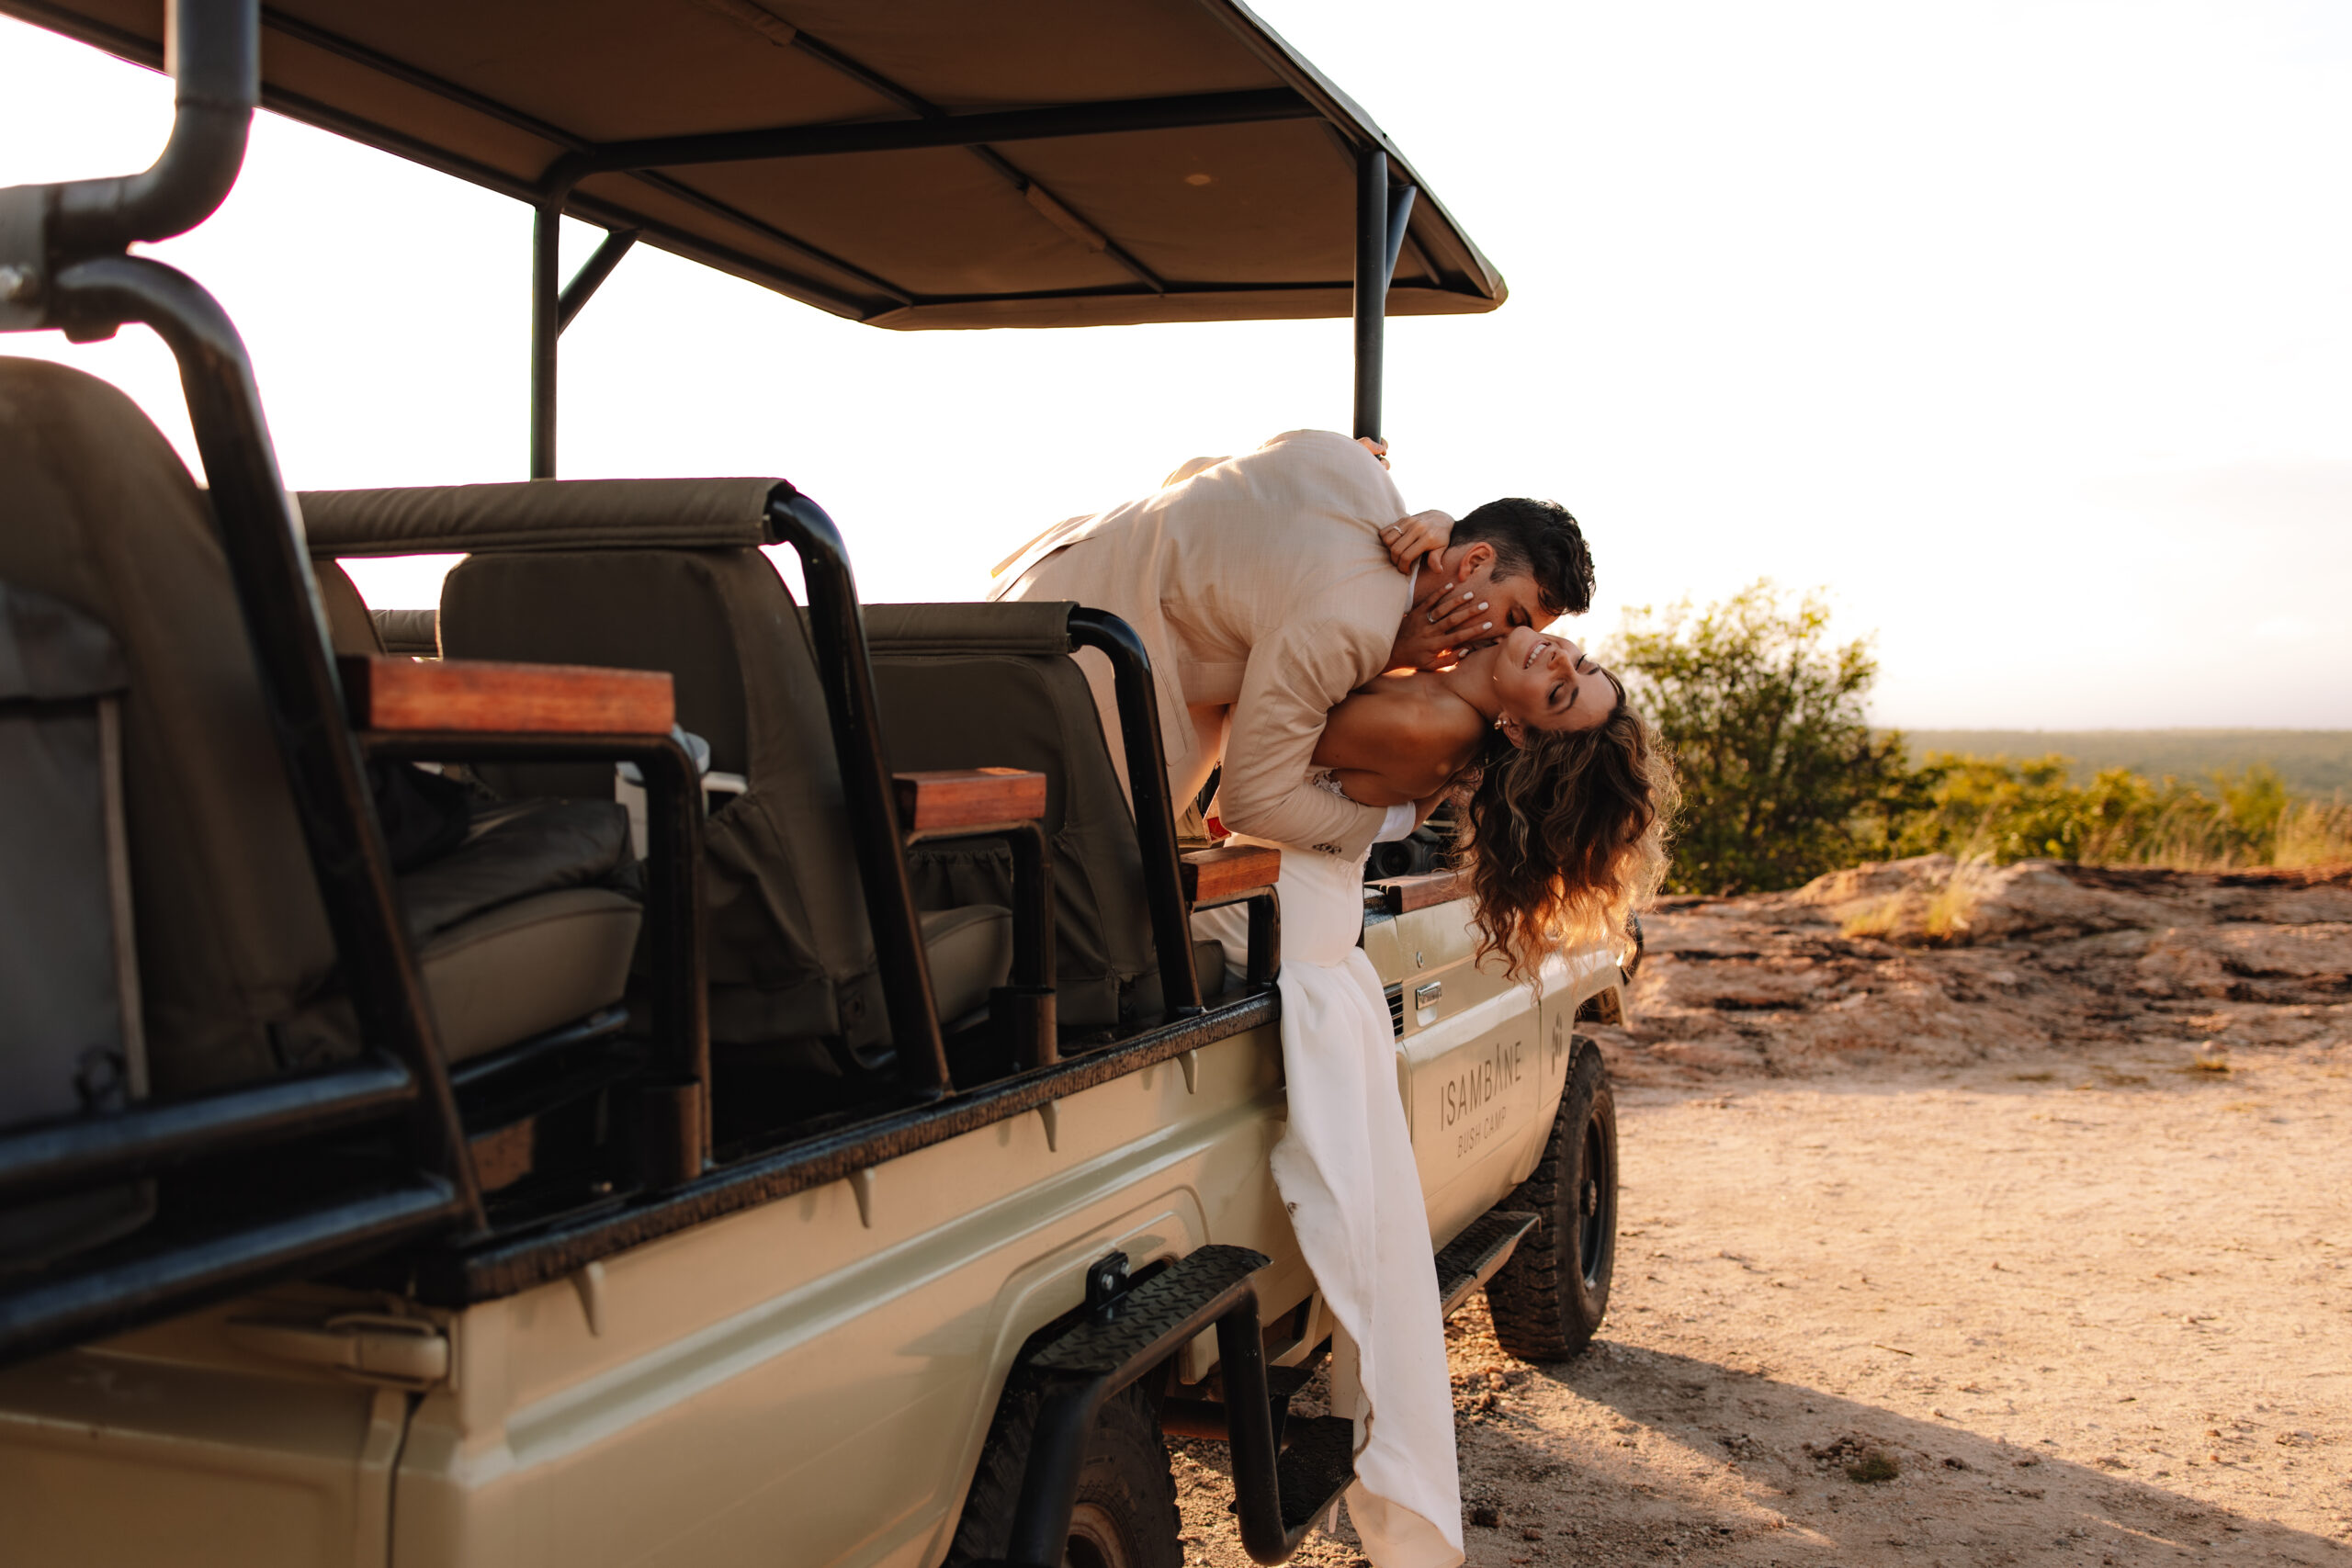 Safari elopement couple hanging out of the safari vehicle in their wedding attire while groom kisses bride's neck